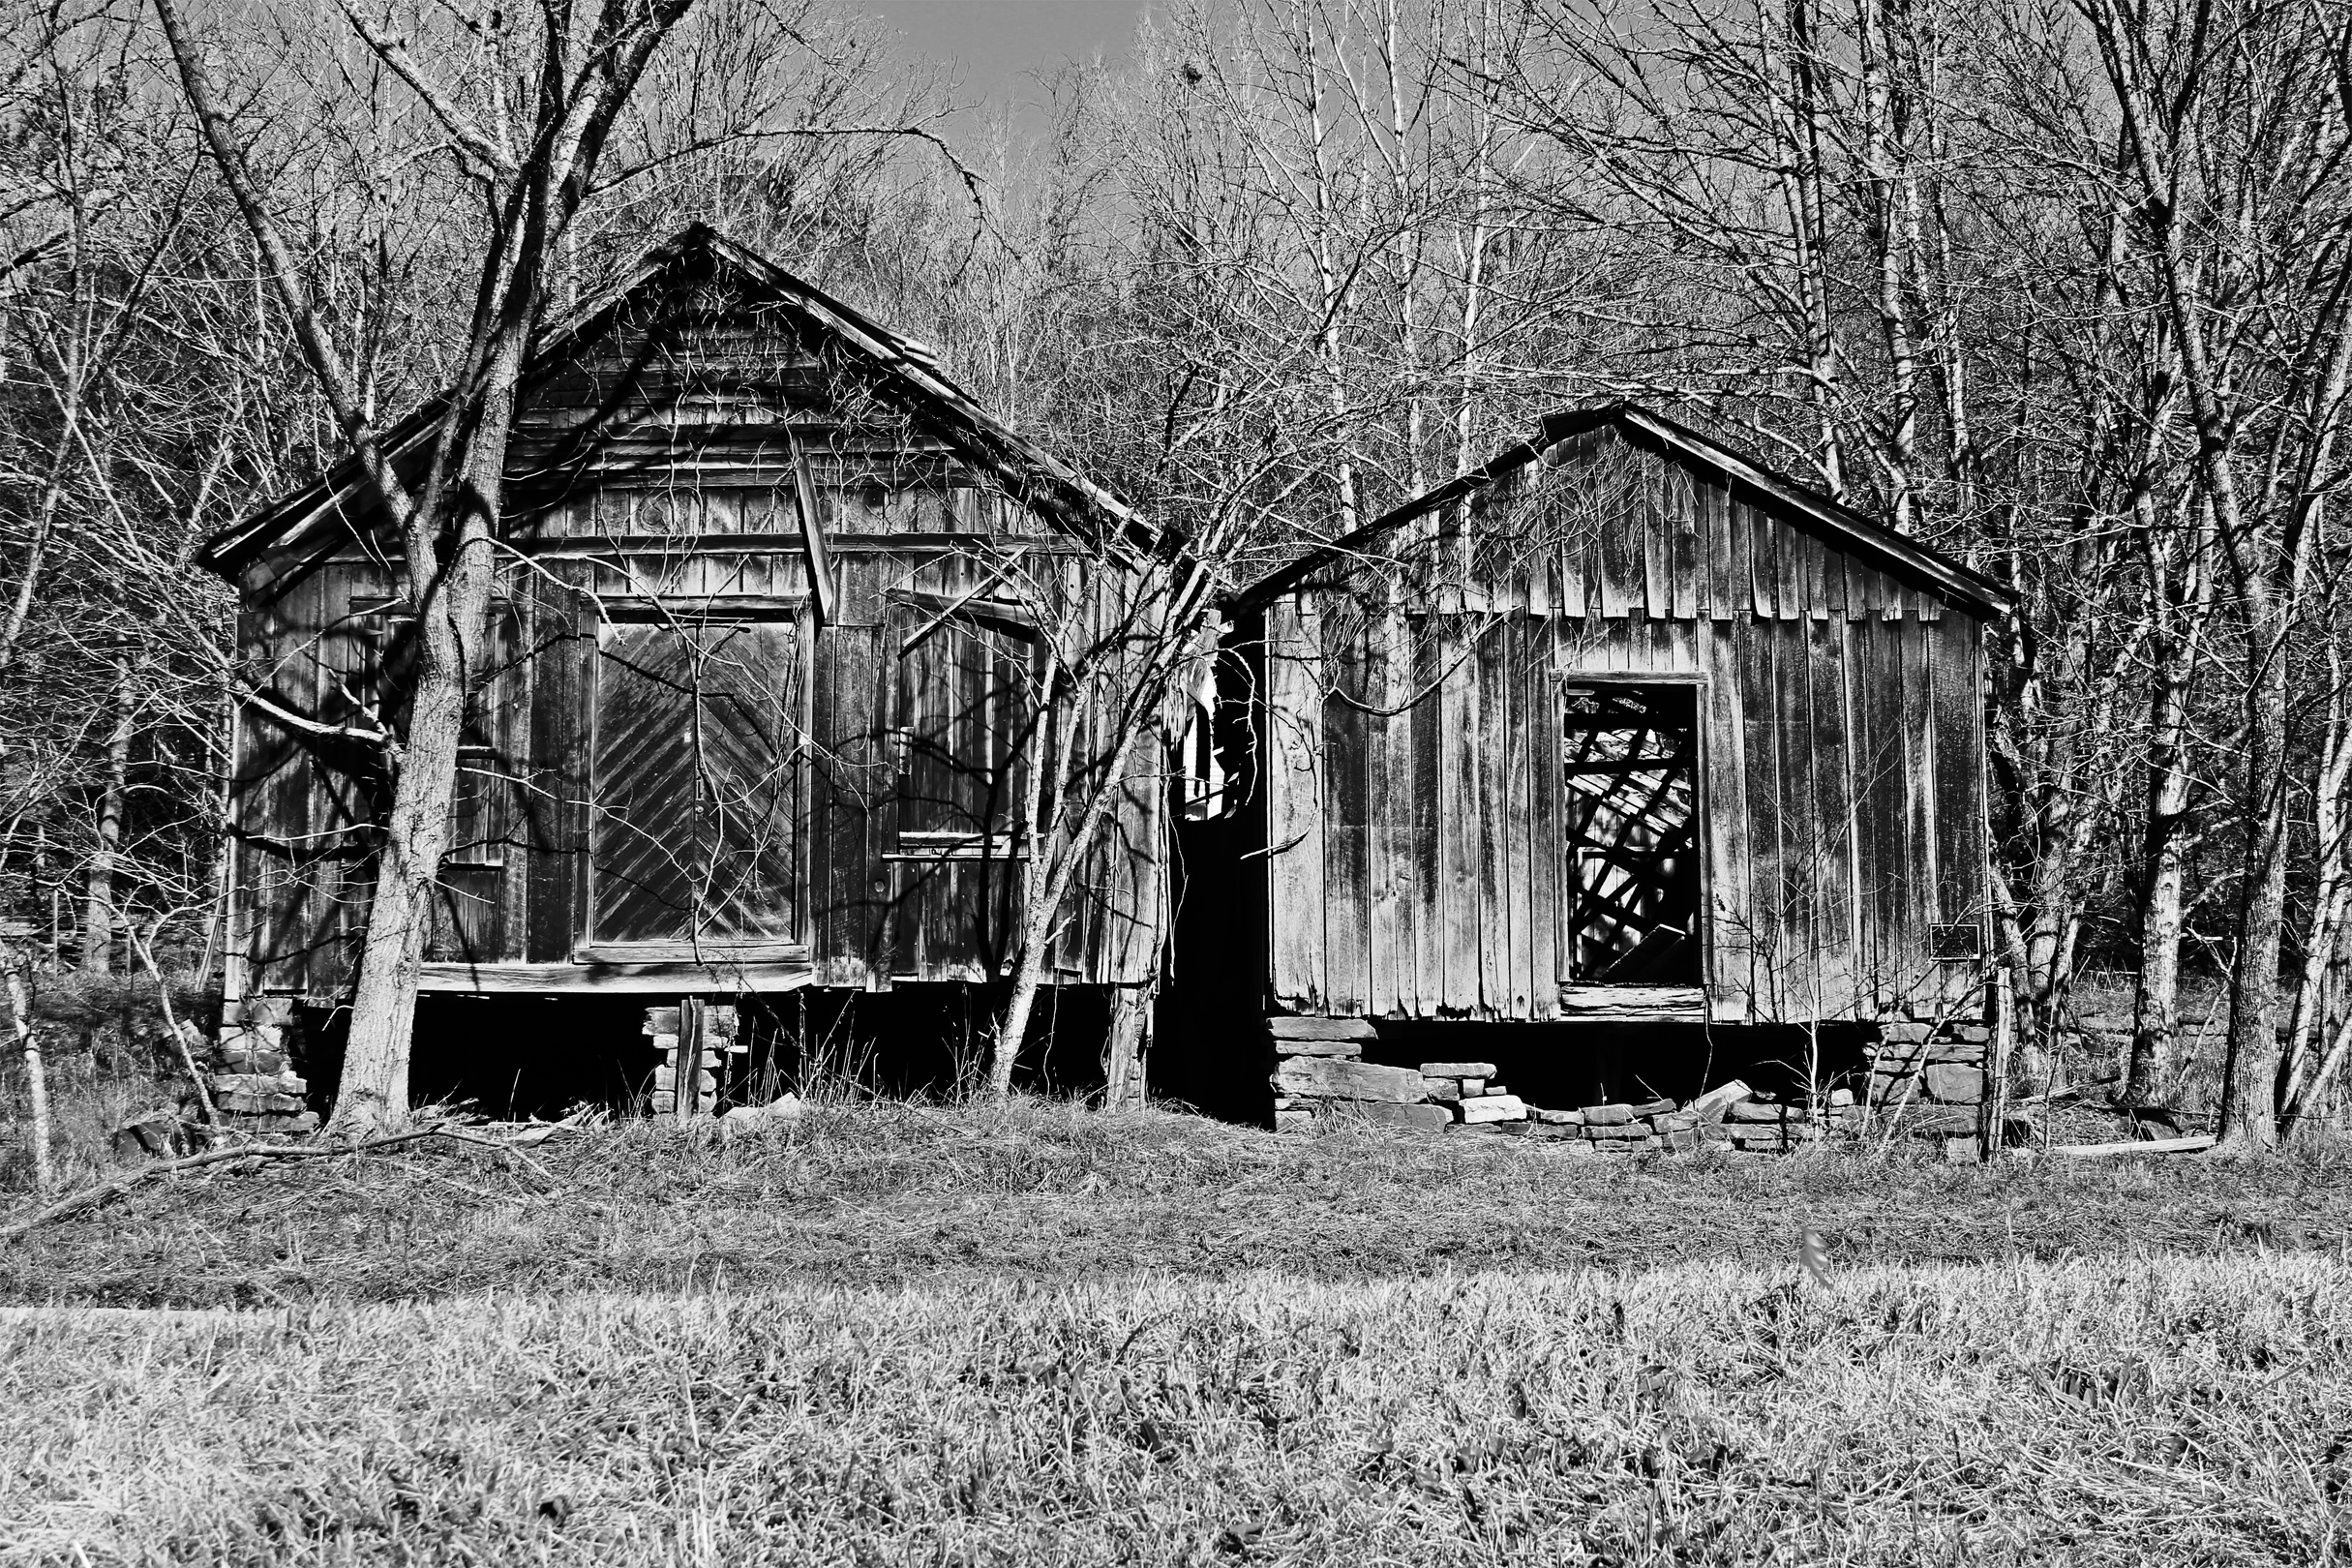    Walter Gilstrap General Store  , 2014. Dutton, Madison County, AR. B&amp;W HDR digital image. 